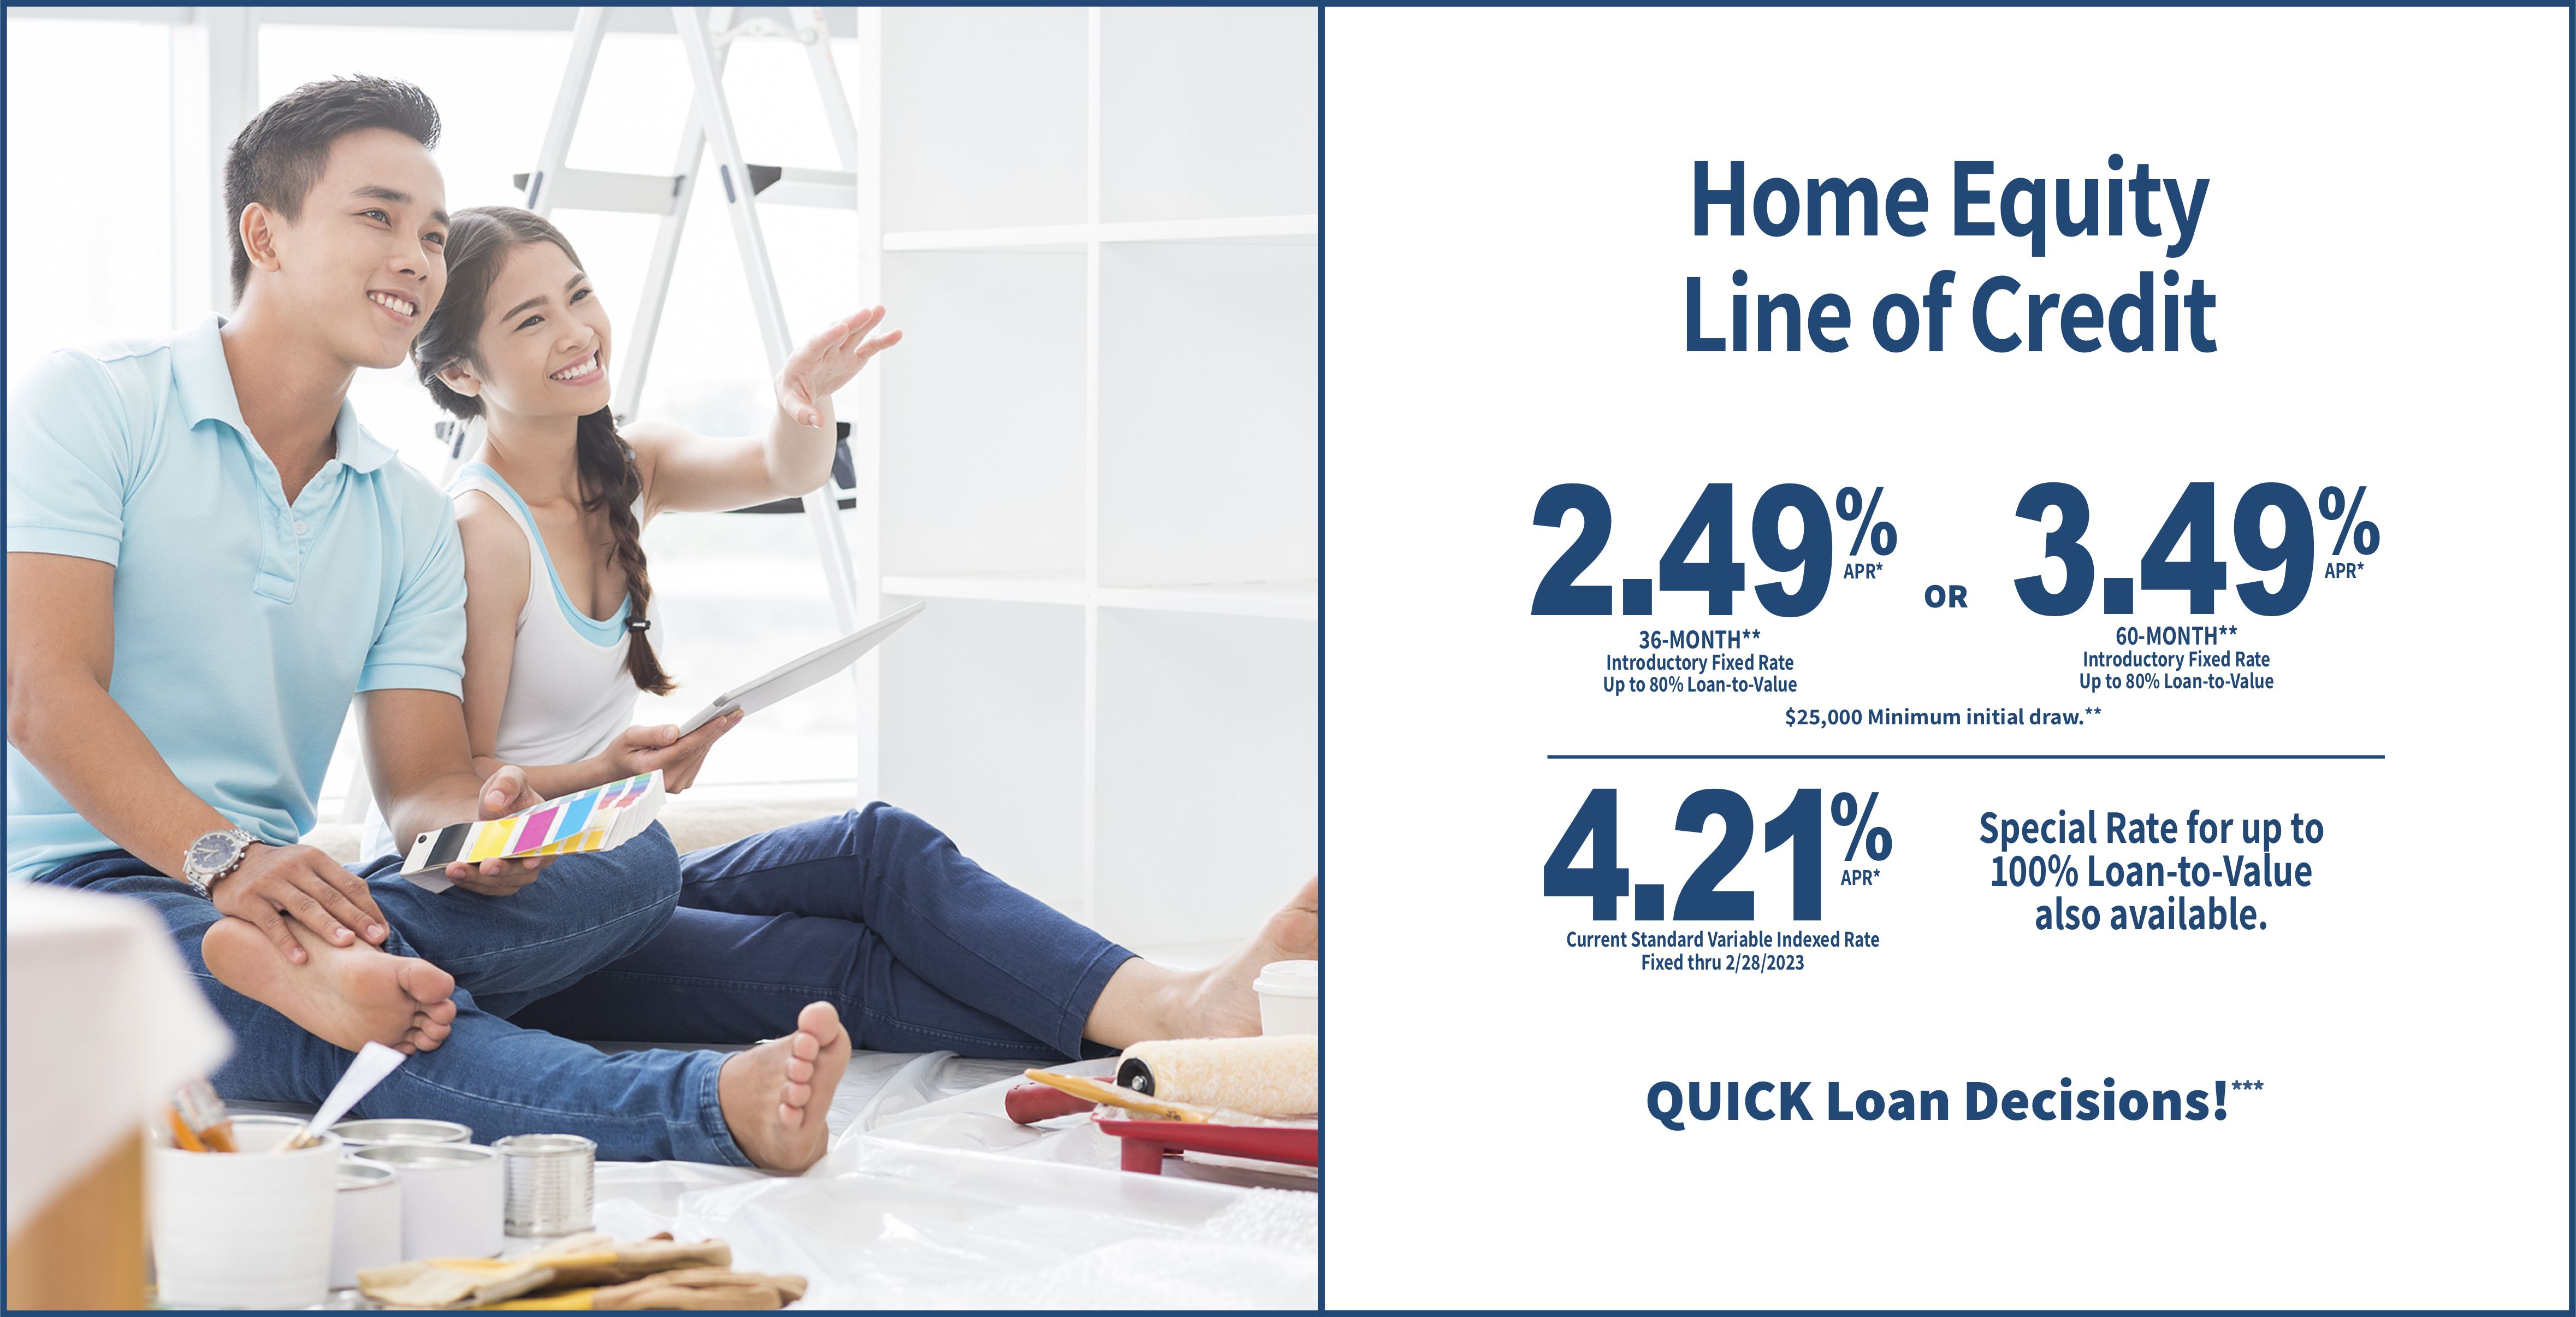 HELOC Special 1.99%APR 36 month. 2.99%APR 60 month. 4.21APR Variable Indexed Rate.